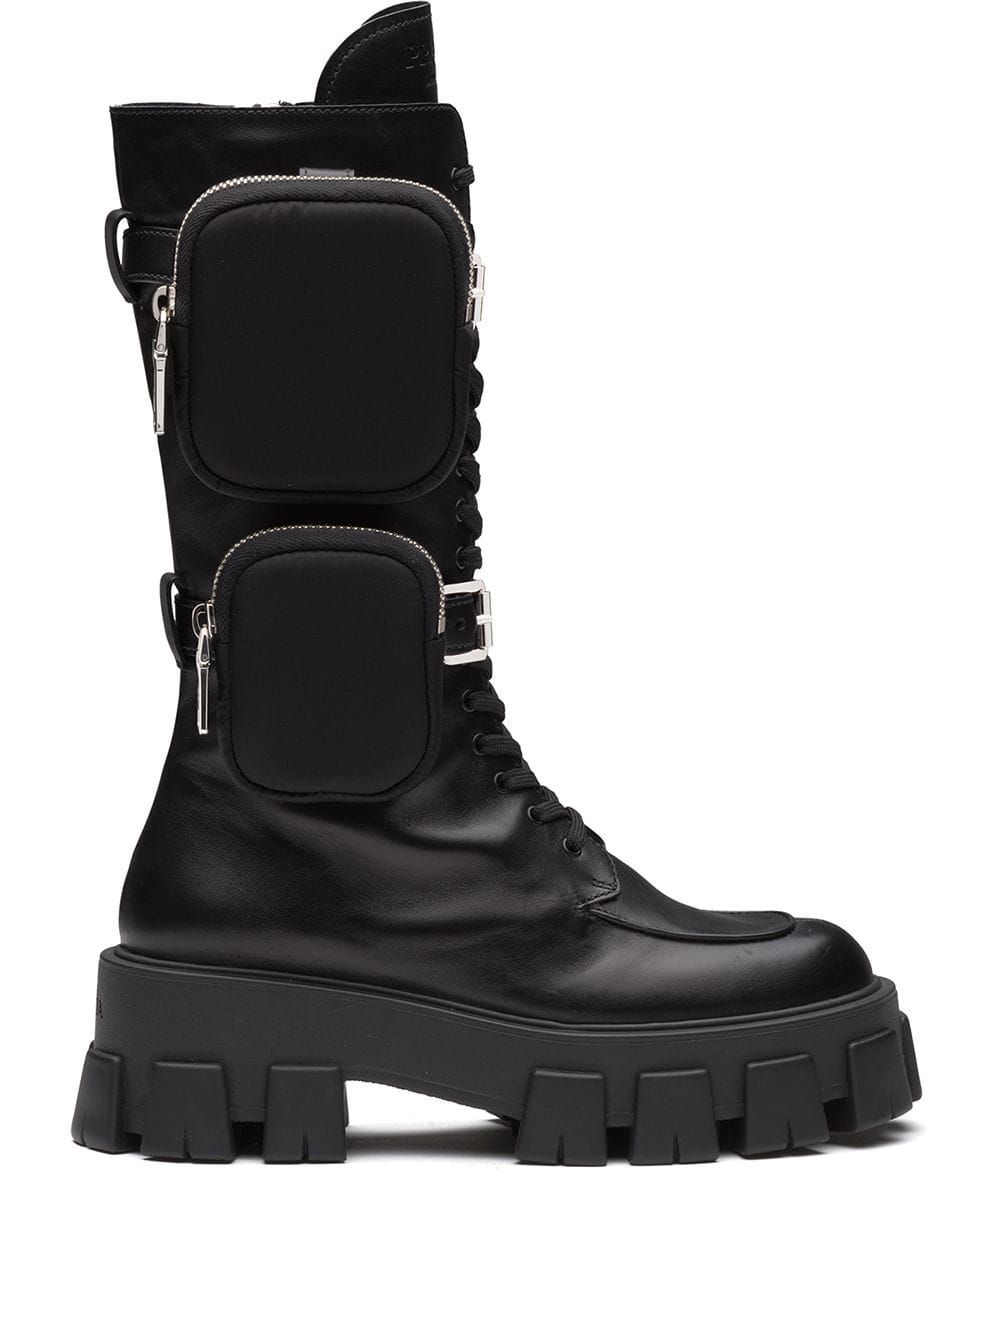 2019 womens boots